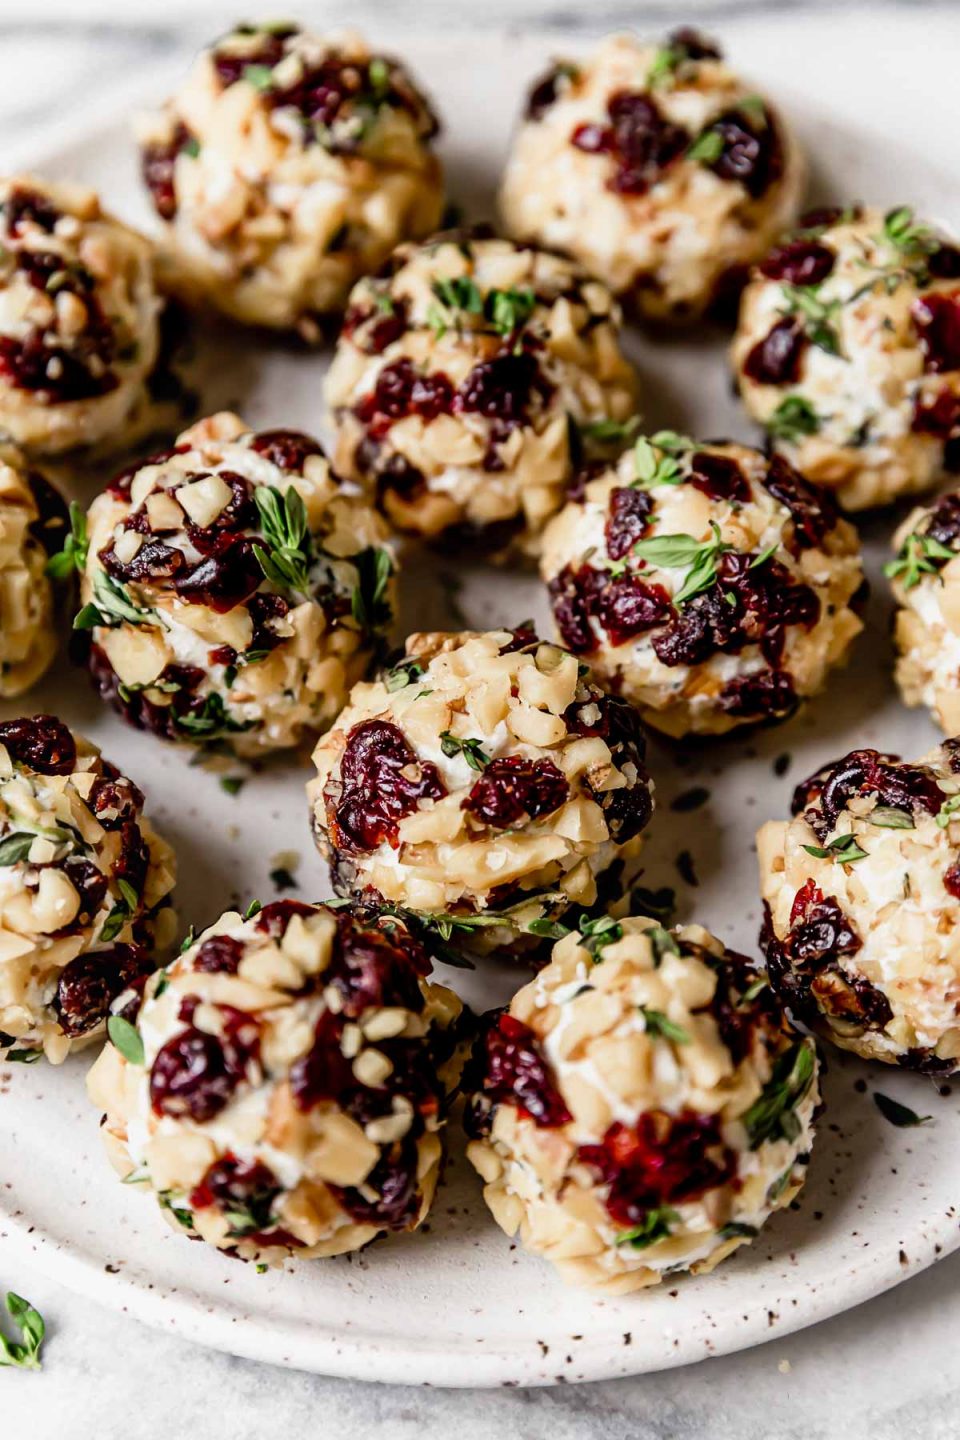 Herbed goat cheese balls, coated in chopped nuts & tart cherries, on a small, speckled white plate.